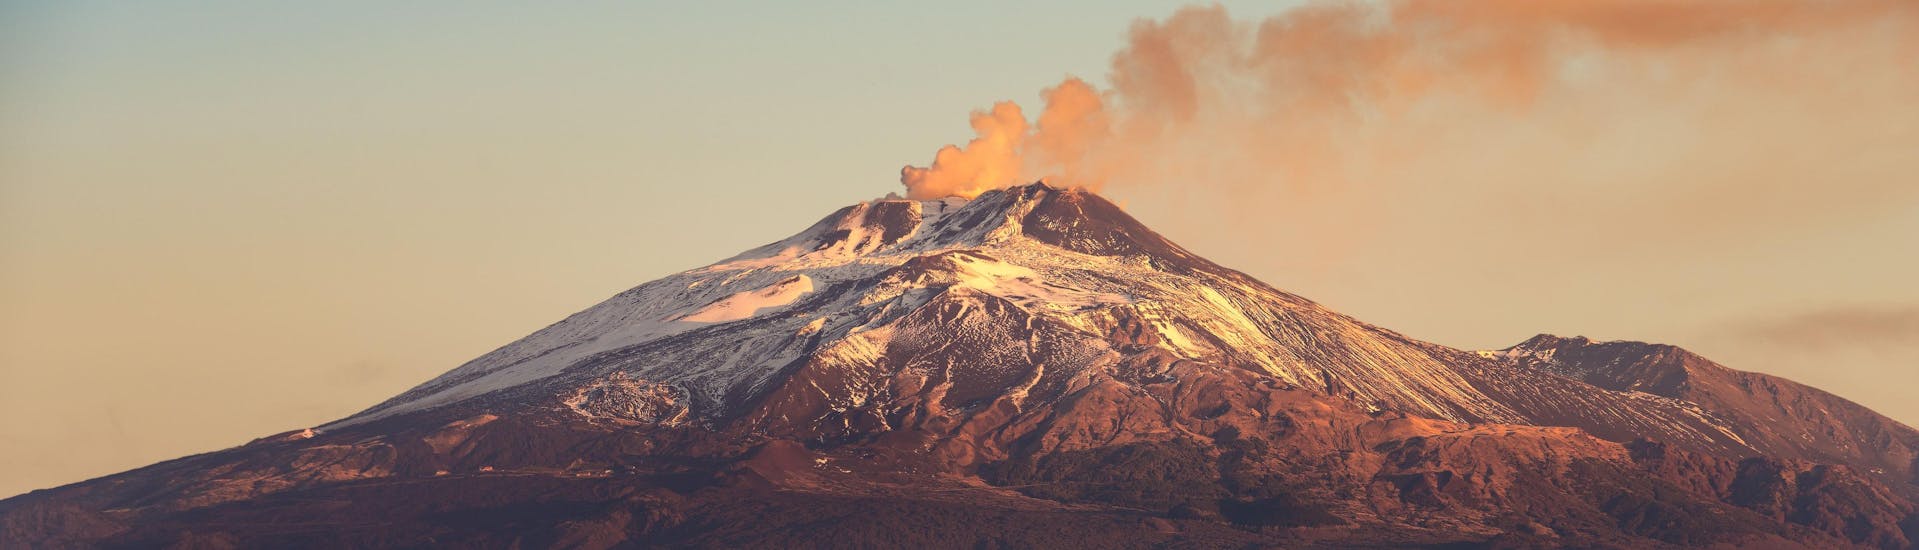 View over Mount Etna at sunset, a popular destination for volcano tours and hiking.